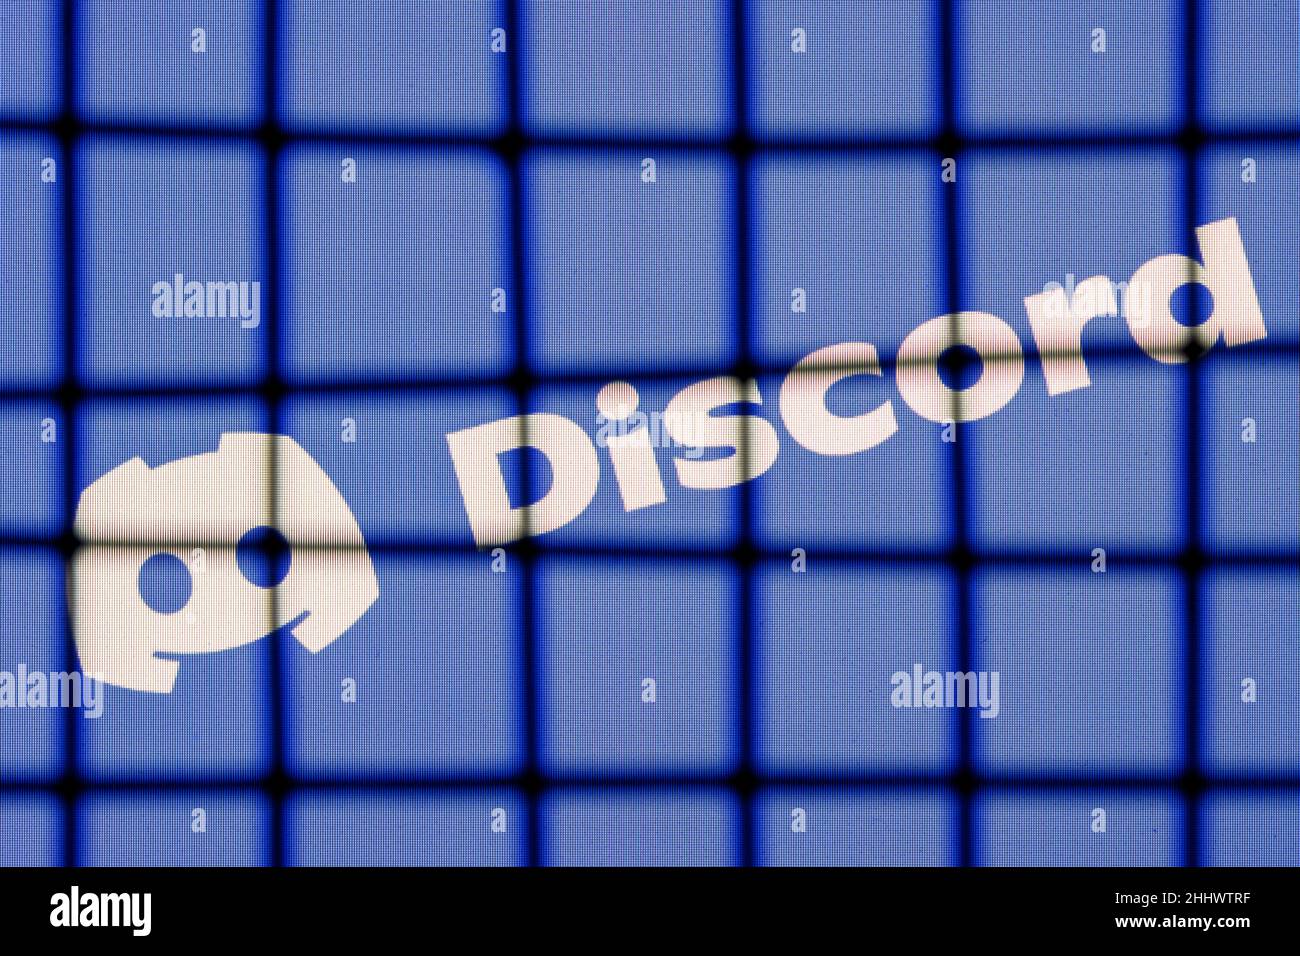 The logo of the Discord social gaming platform behind bars. The concept of Discord censorship and prohibition. Stock Photo